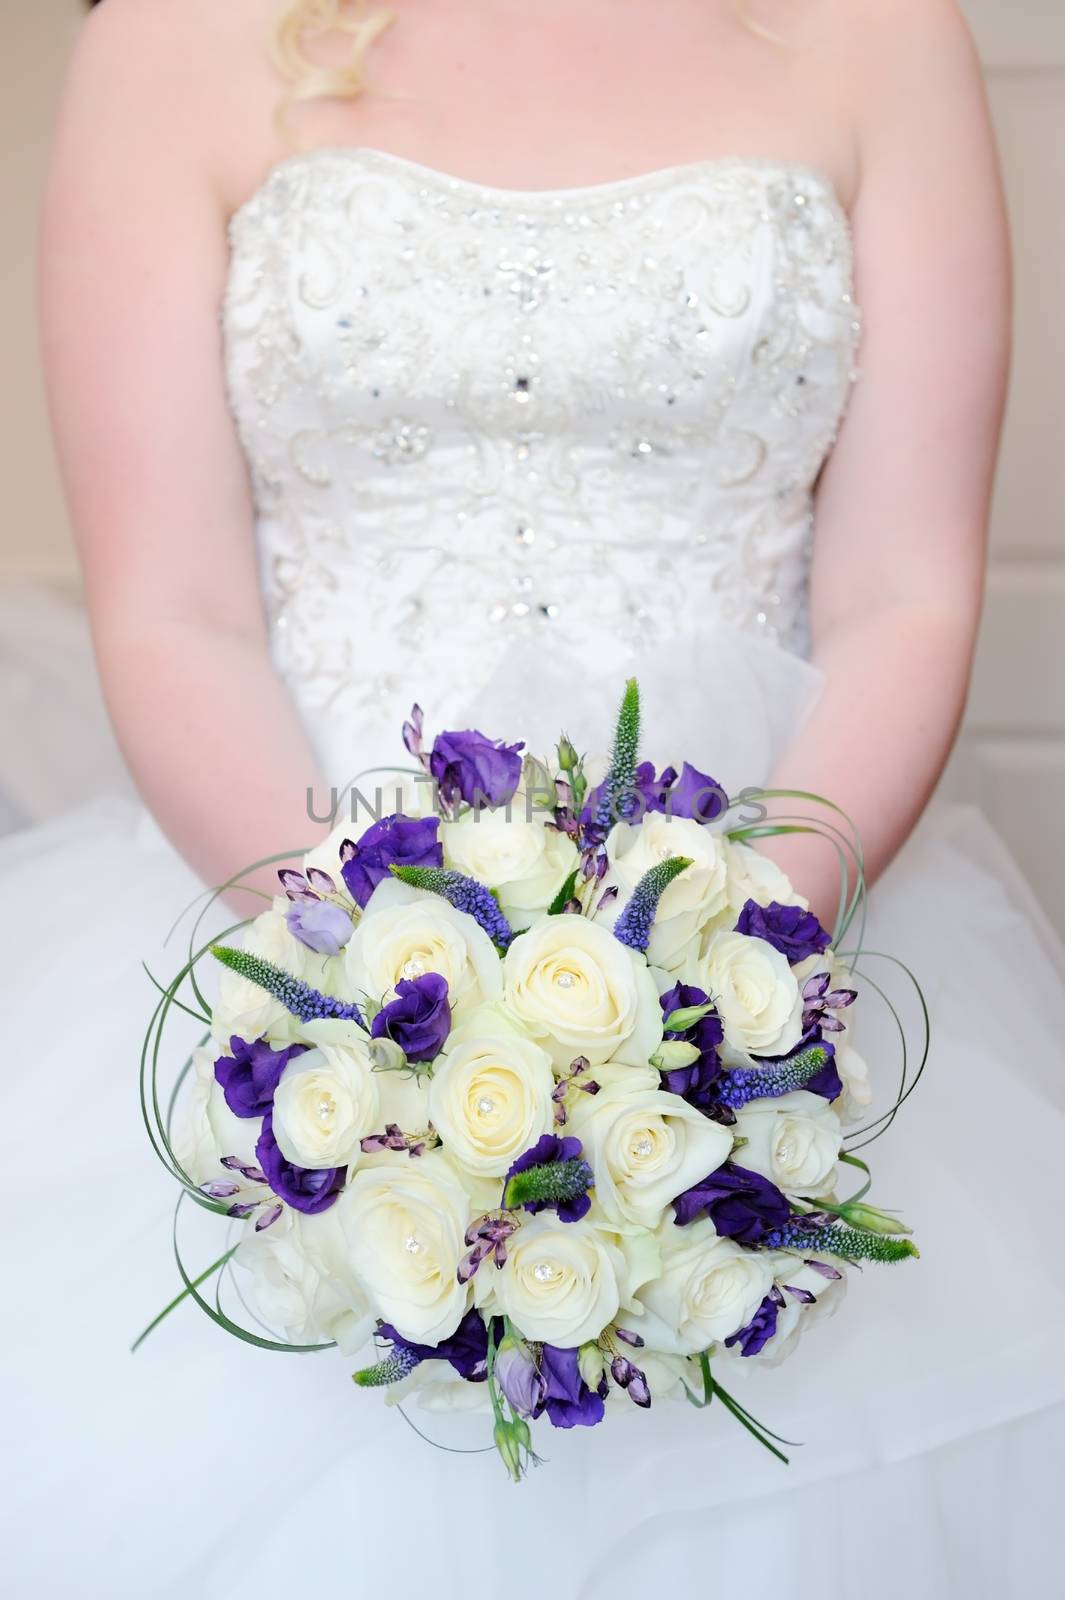 Bride bouquet and dress detail by kmwphotography